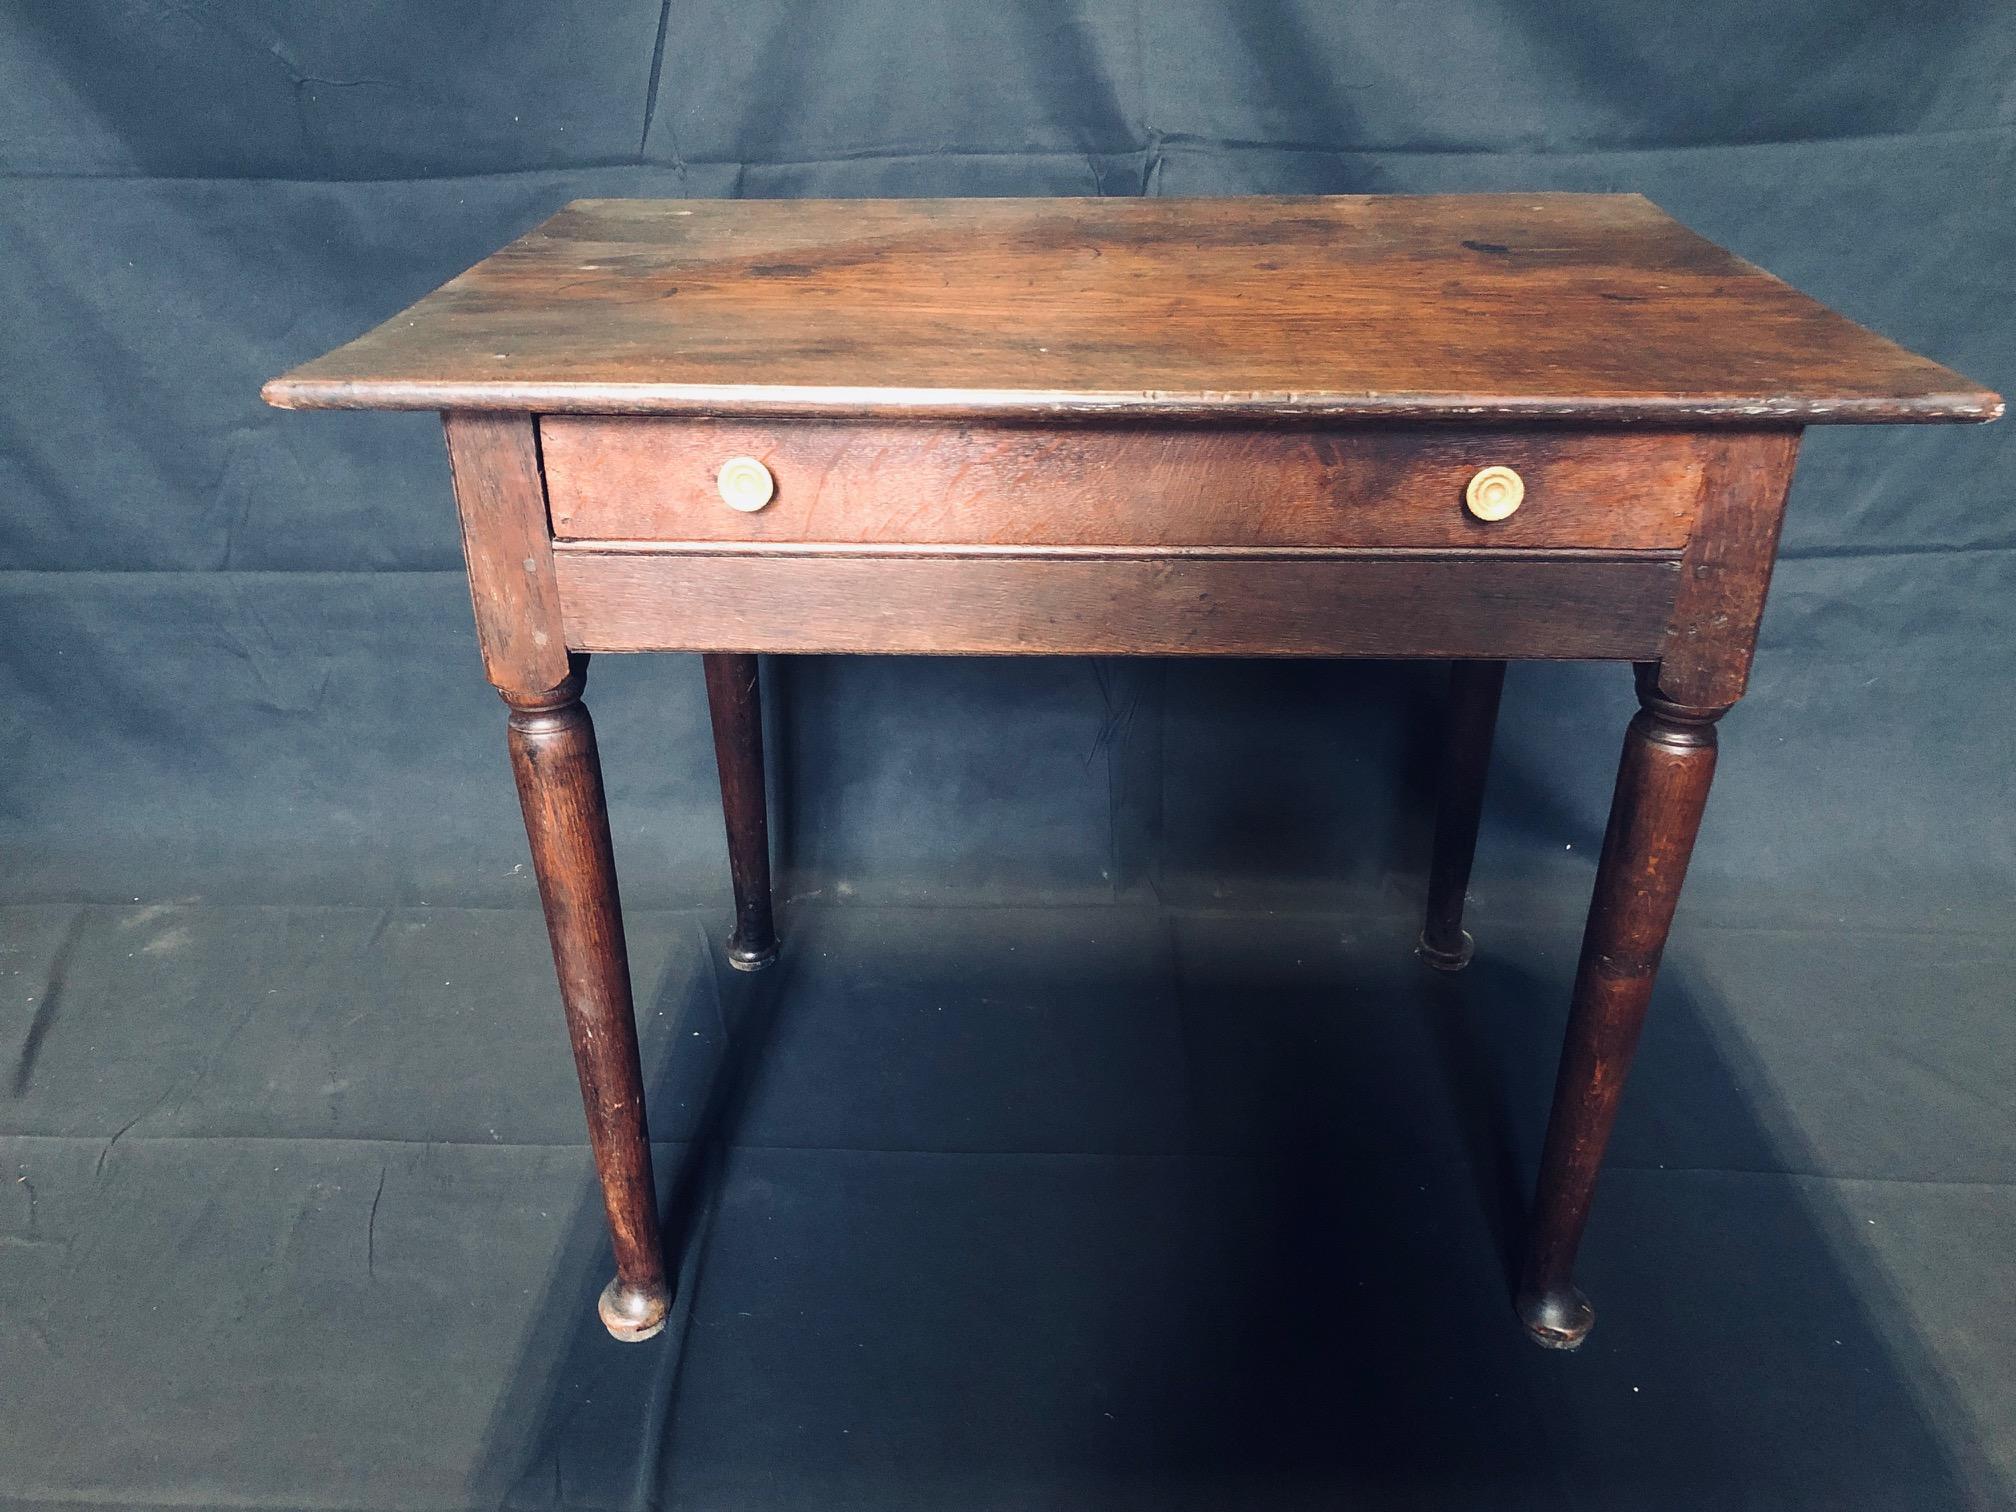 Wonderful antique oak side table with bronze knobs - can serve as nightstand or side table. Gorgeous bronze knobs not original to piece. 

#5141.